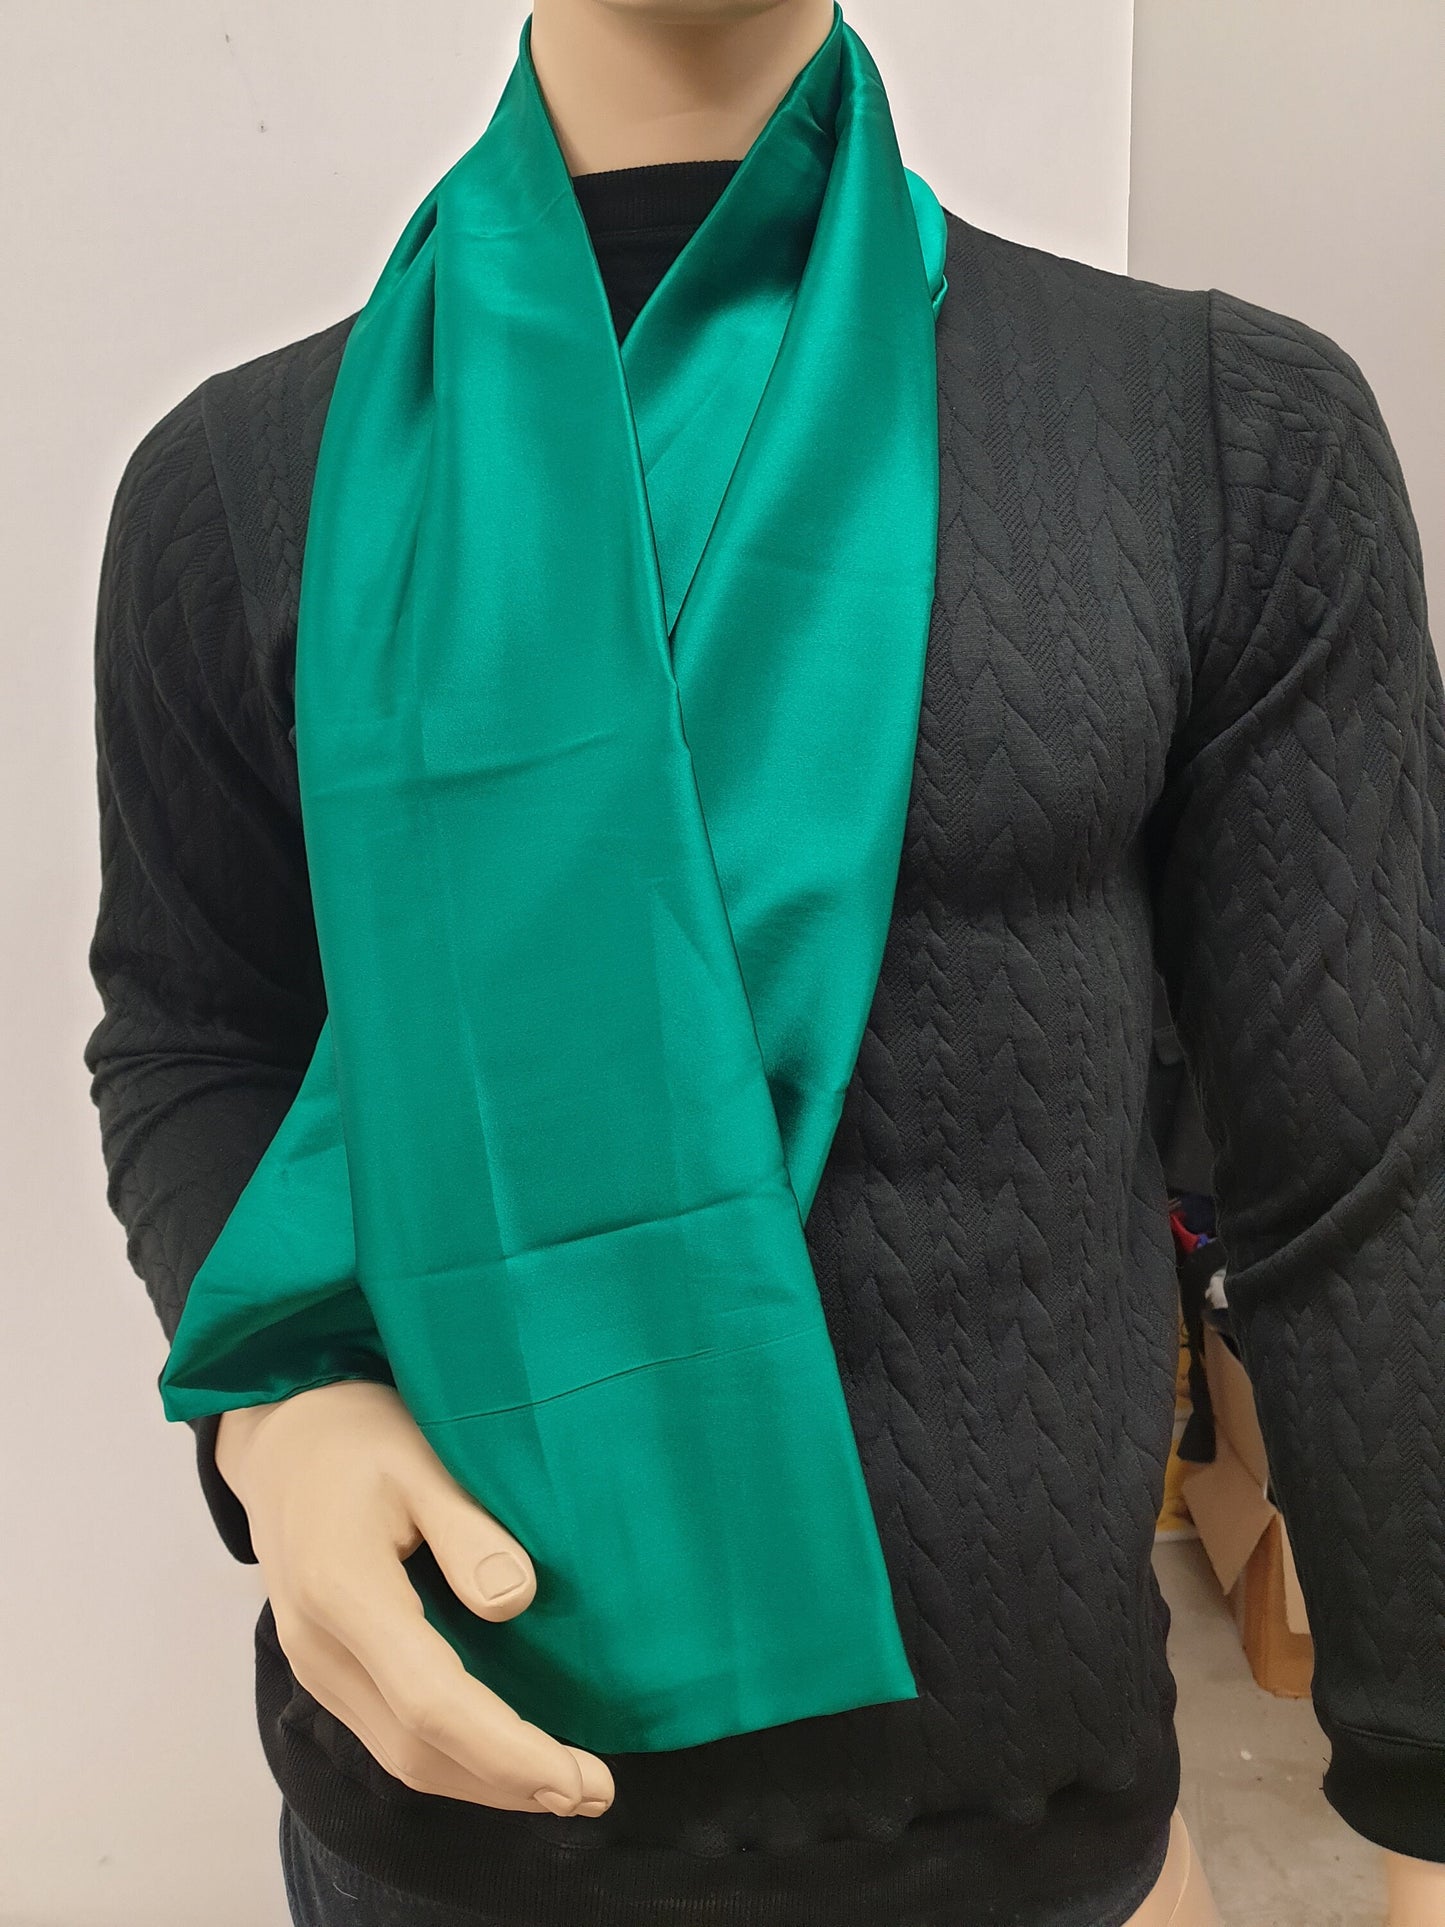 GREEN hight quality silk scarf, hand made in France.